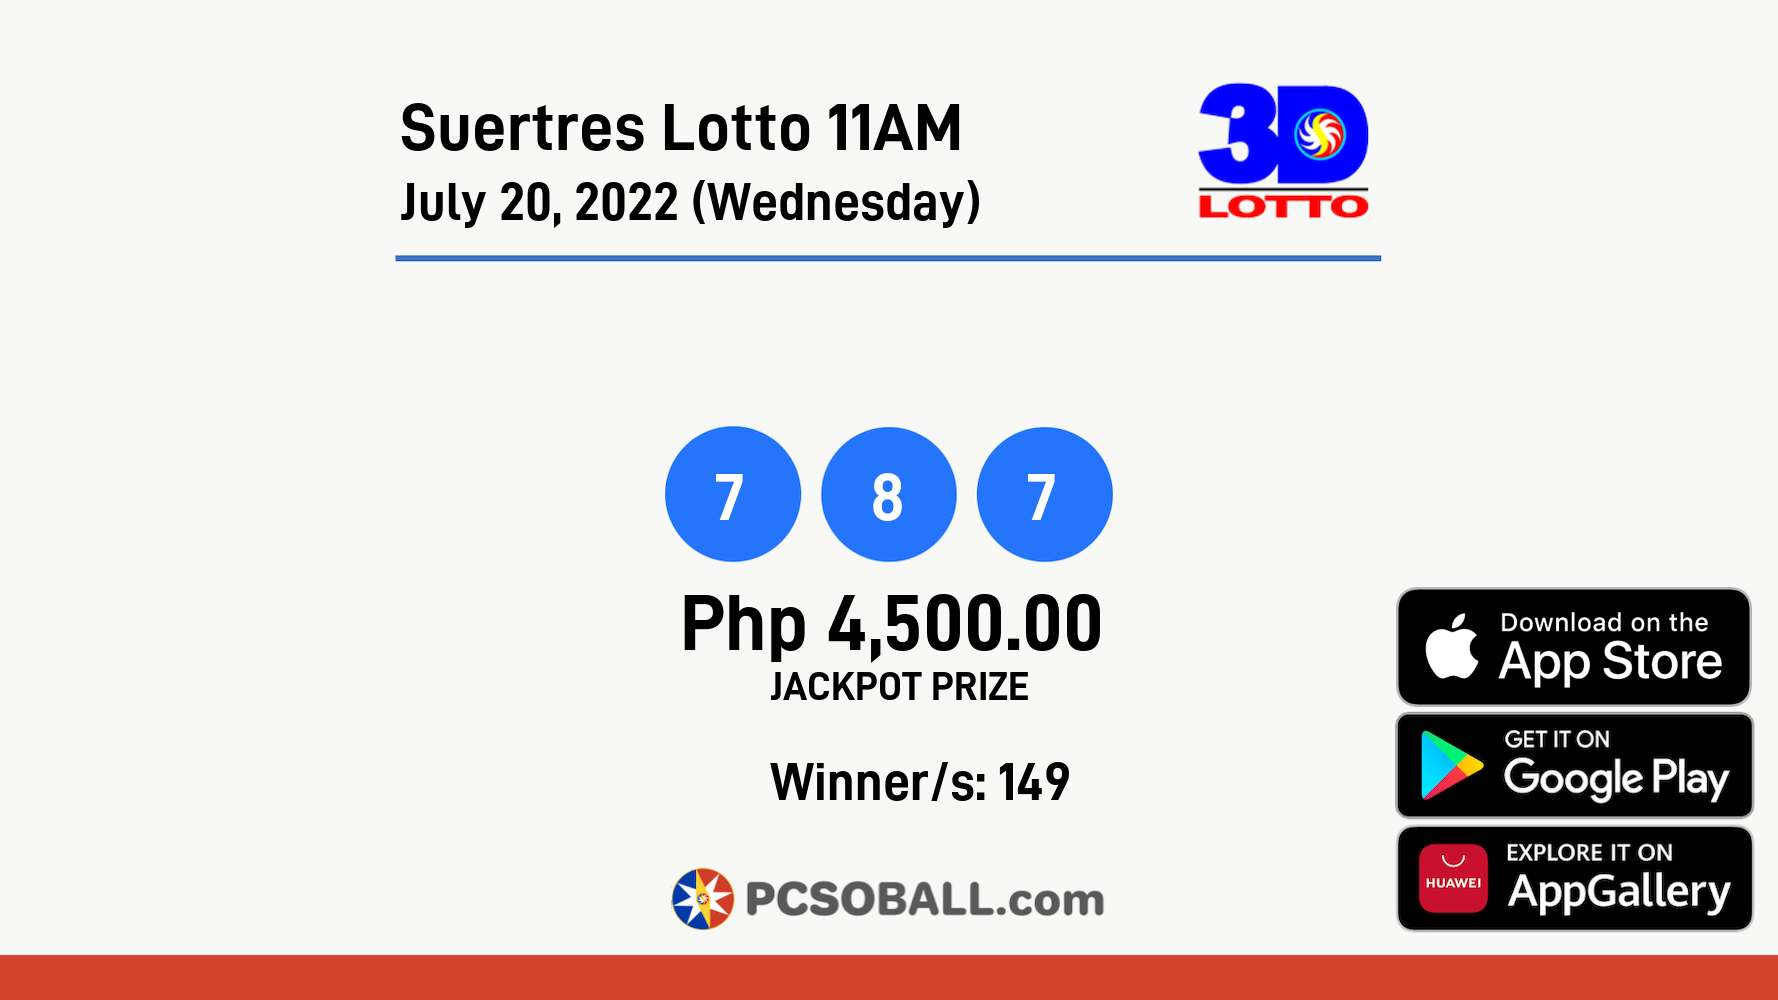 Suertres Lotto 11AM July 20, 2022 (Wednesday) Result